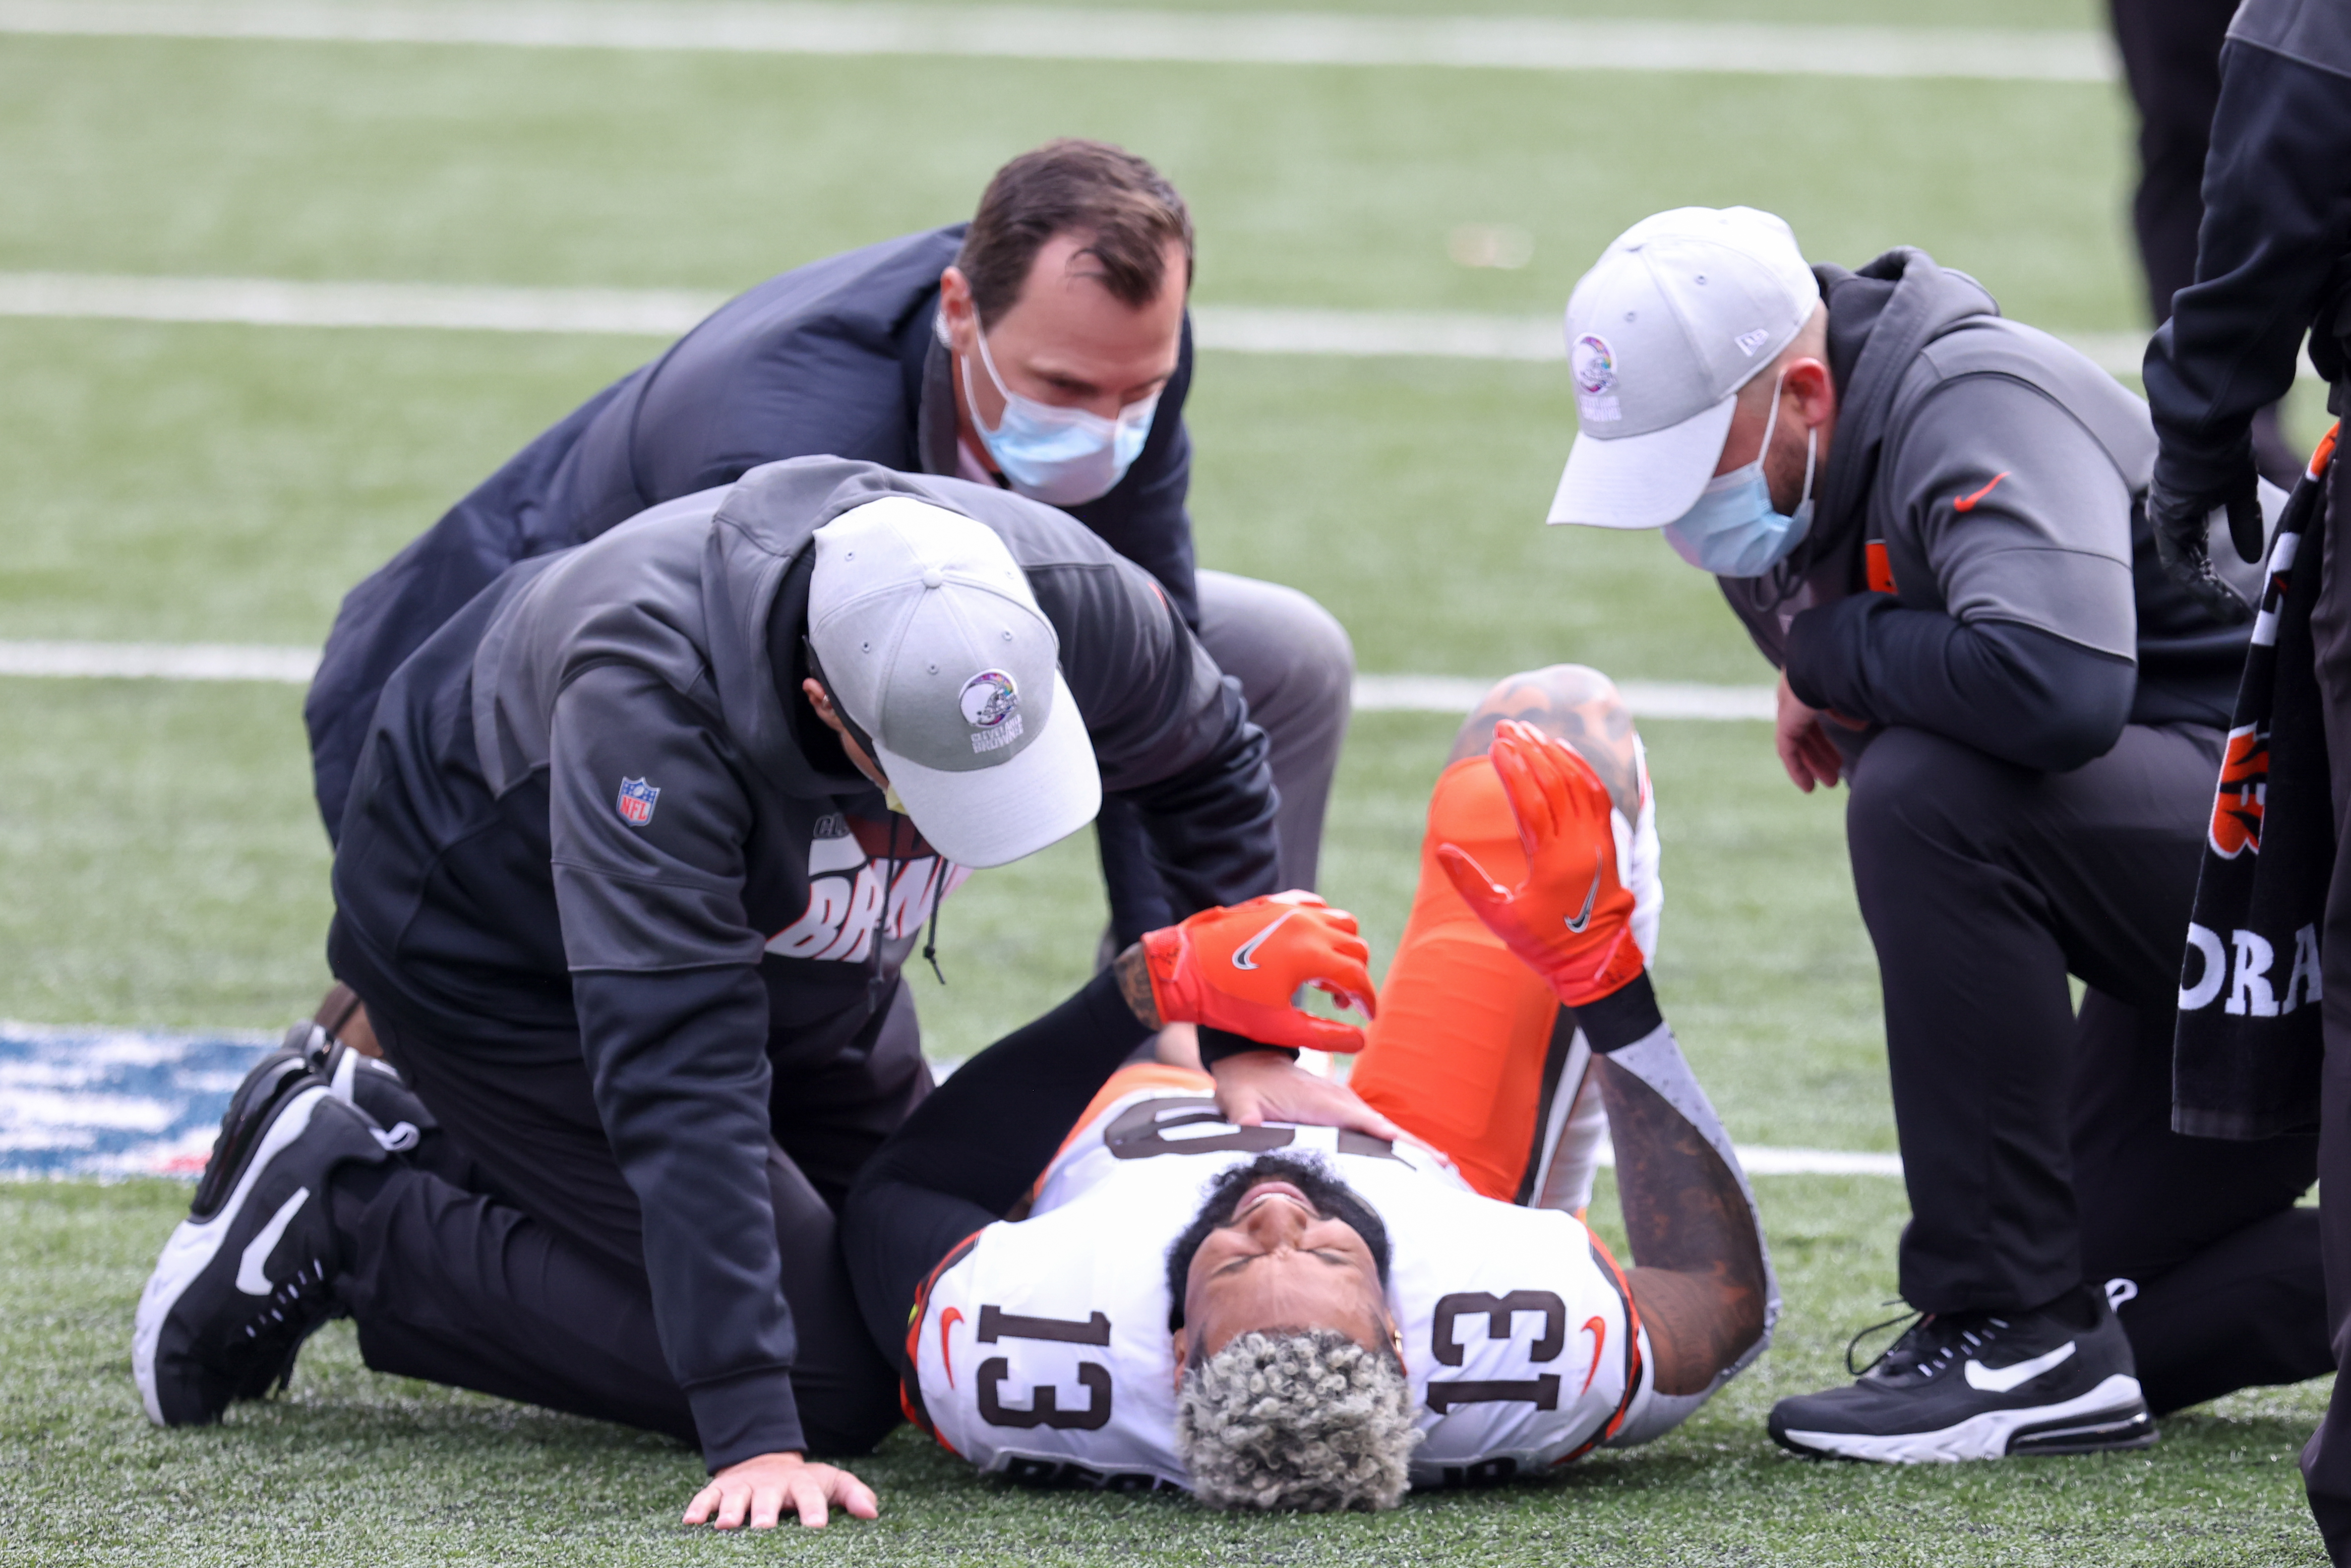 Odell Beckham surgery: Browns WR gets core muscle injury